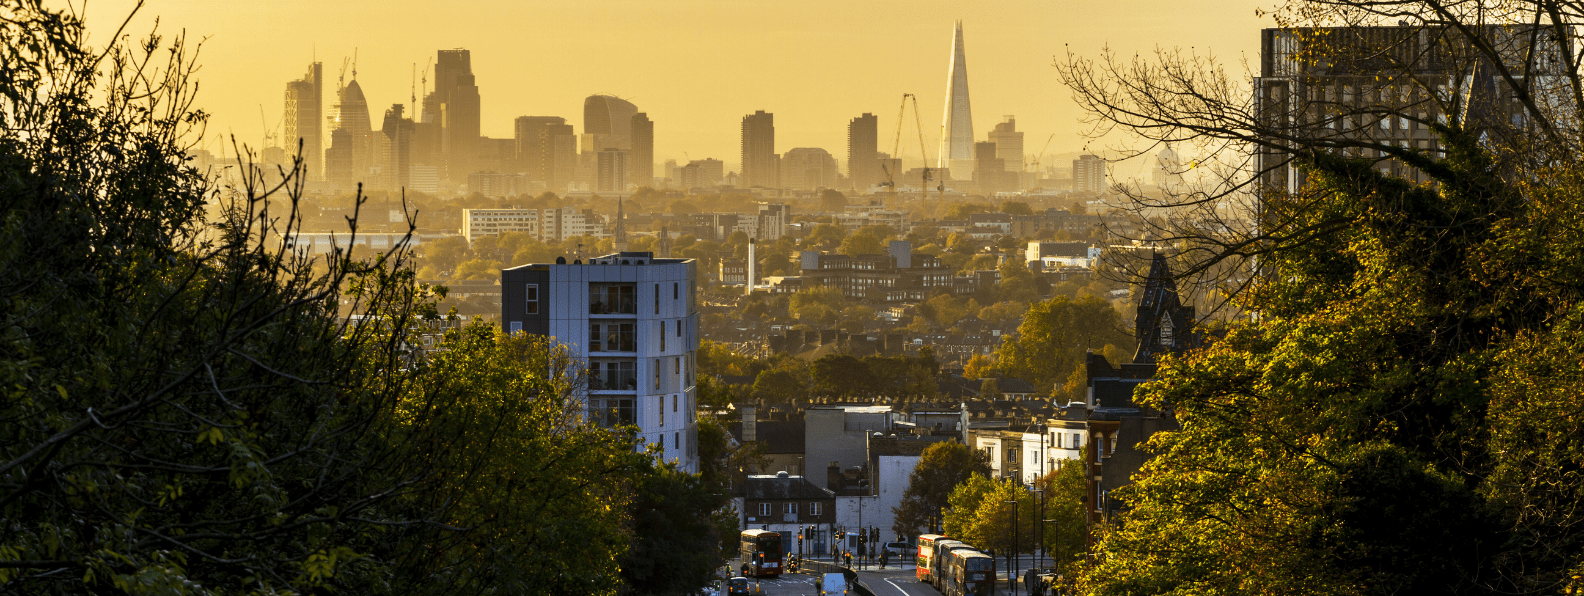 Places to visit and things to do in Archway London